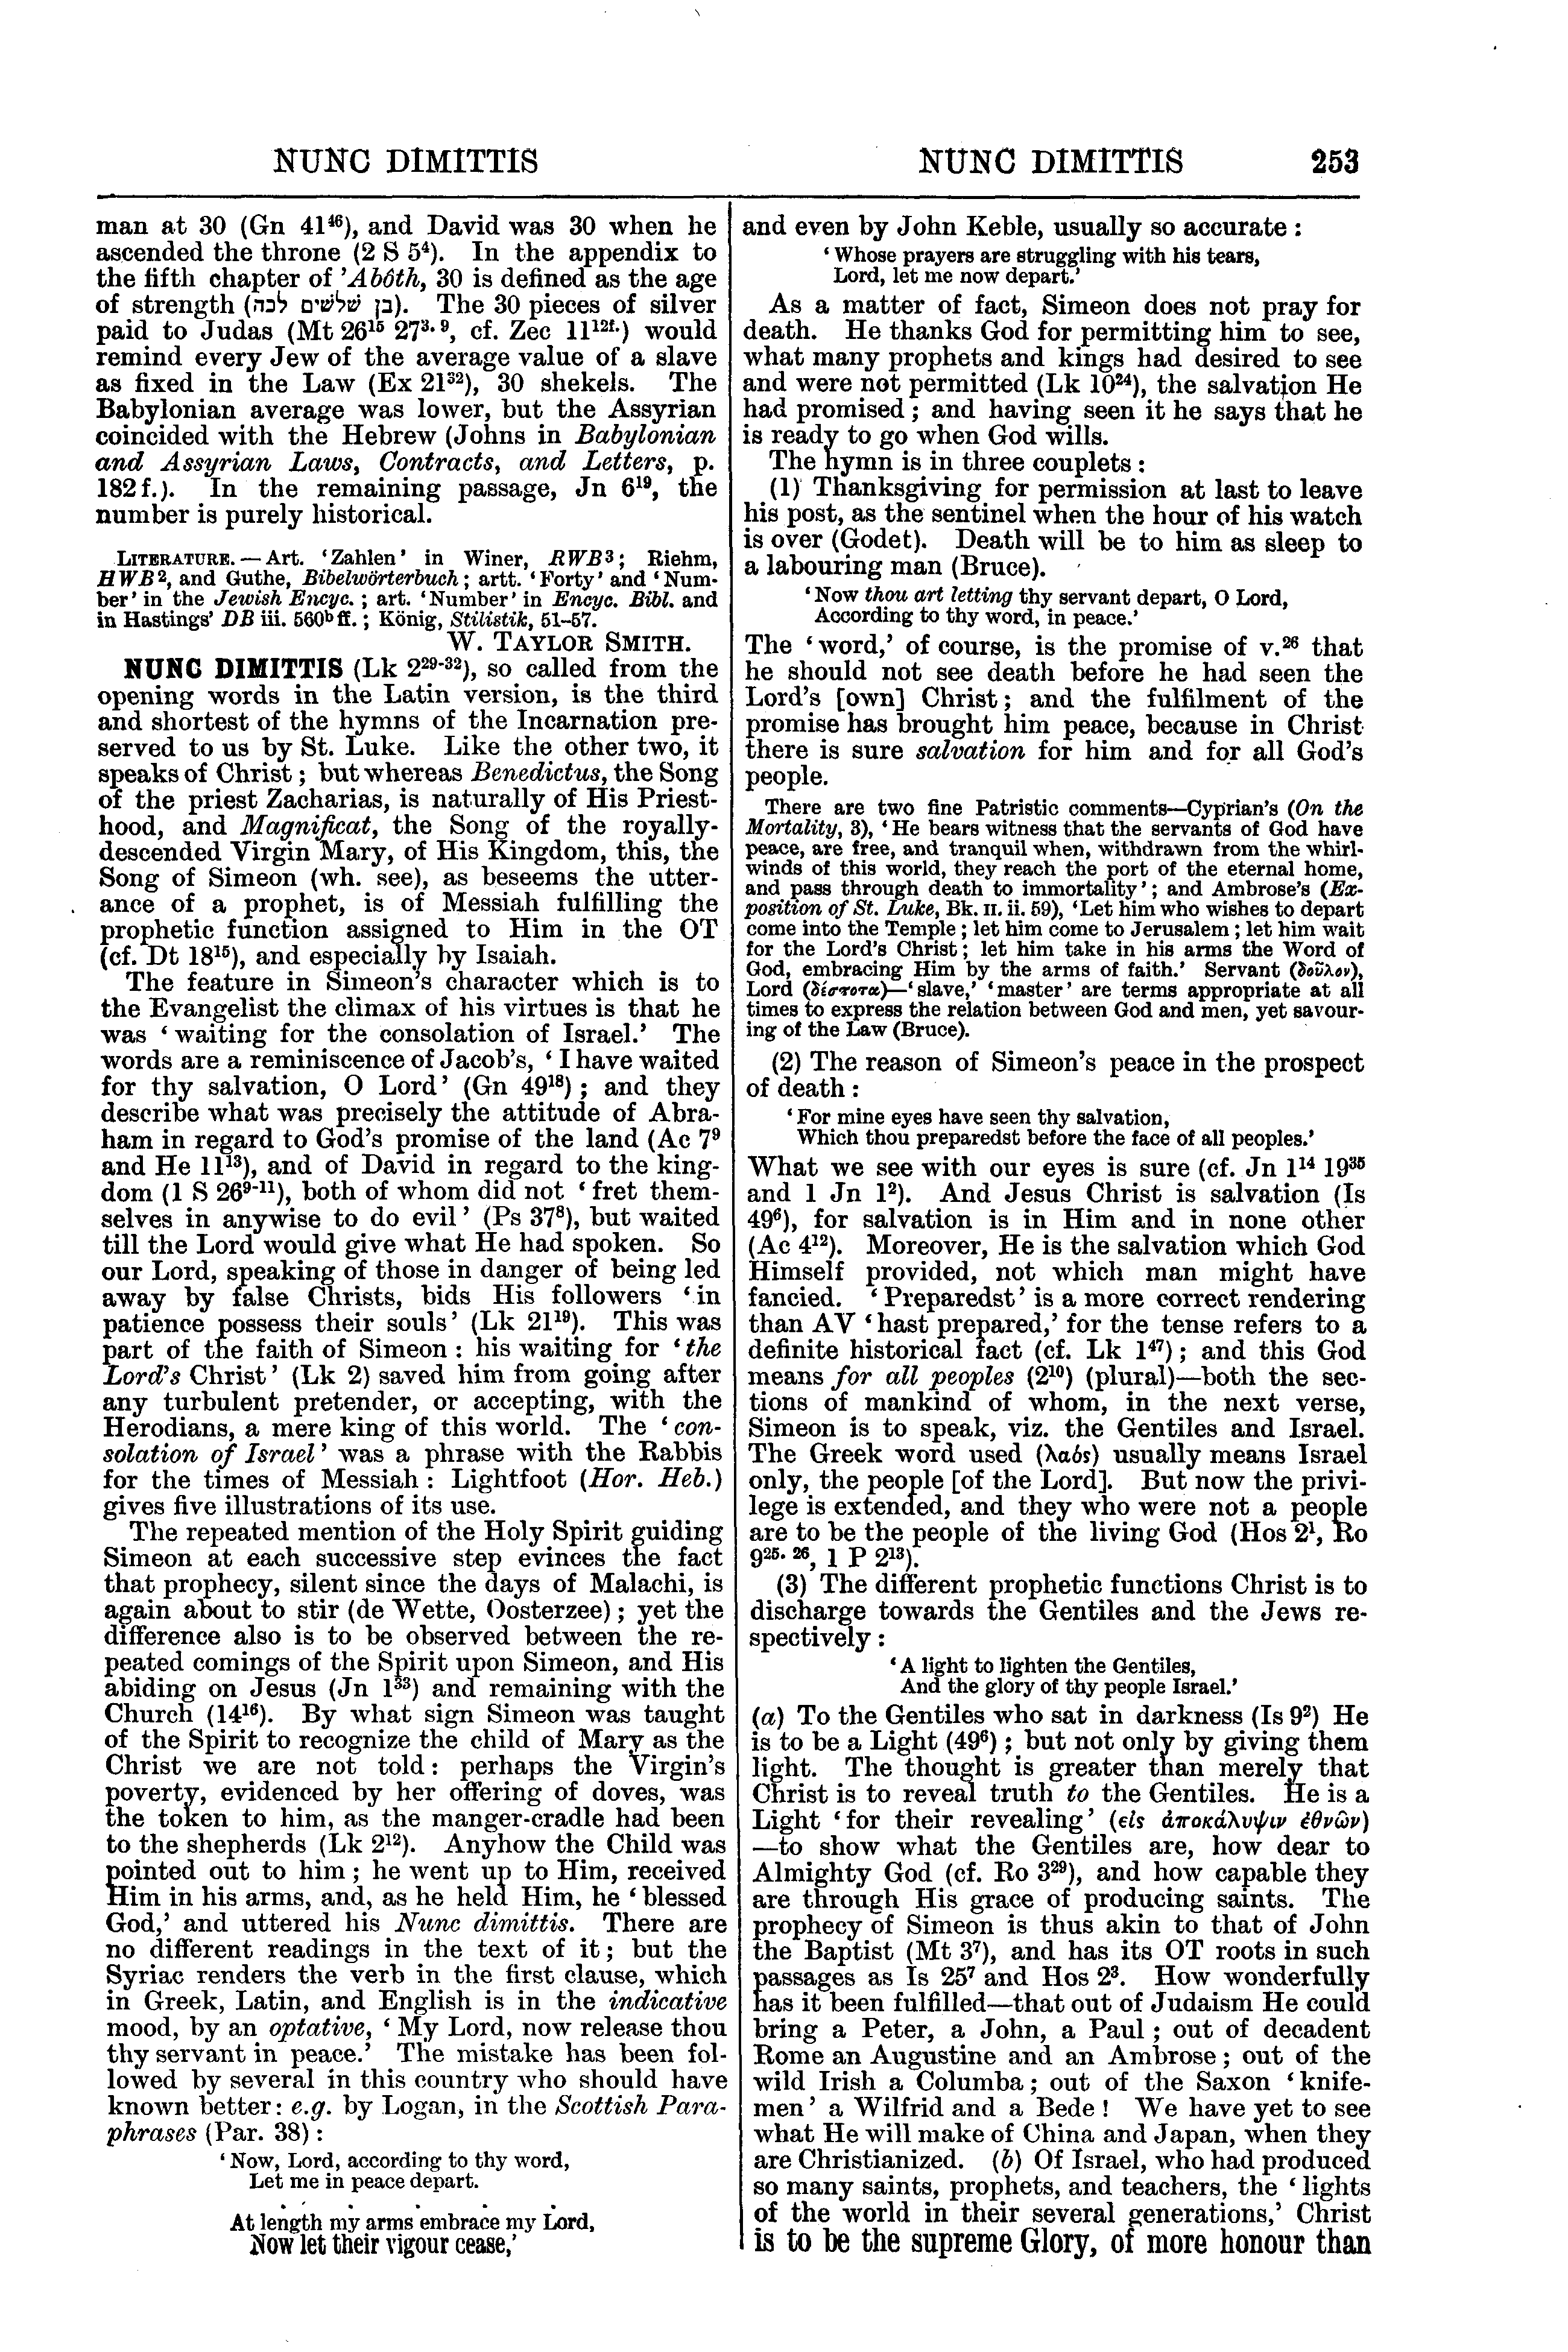 Image of page 253